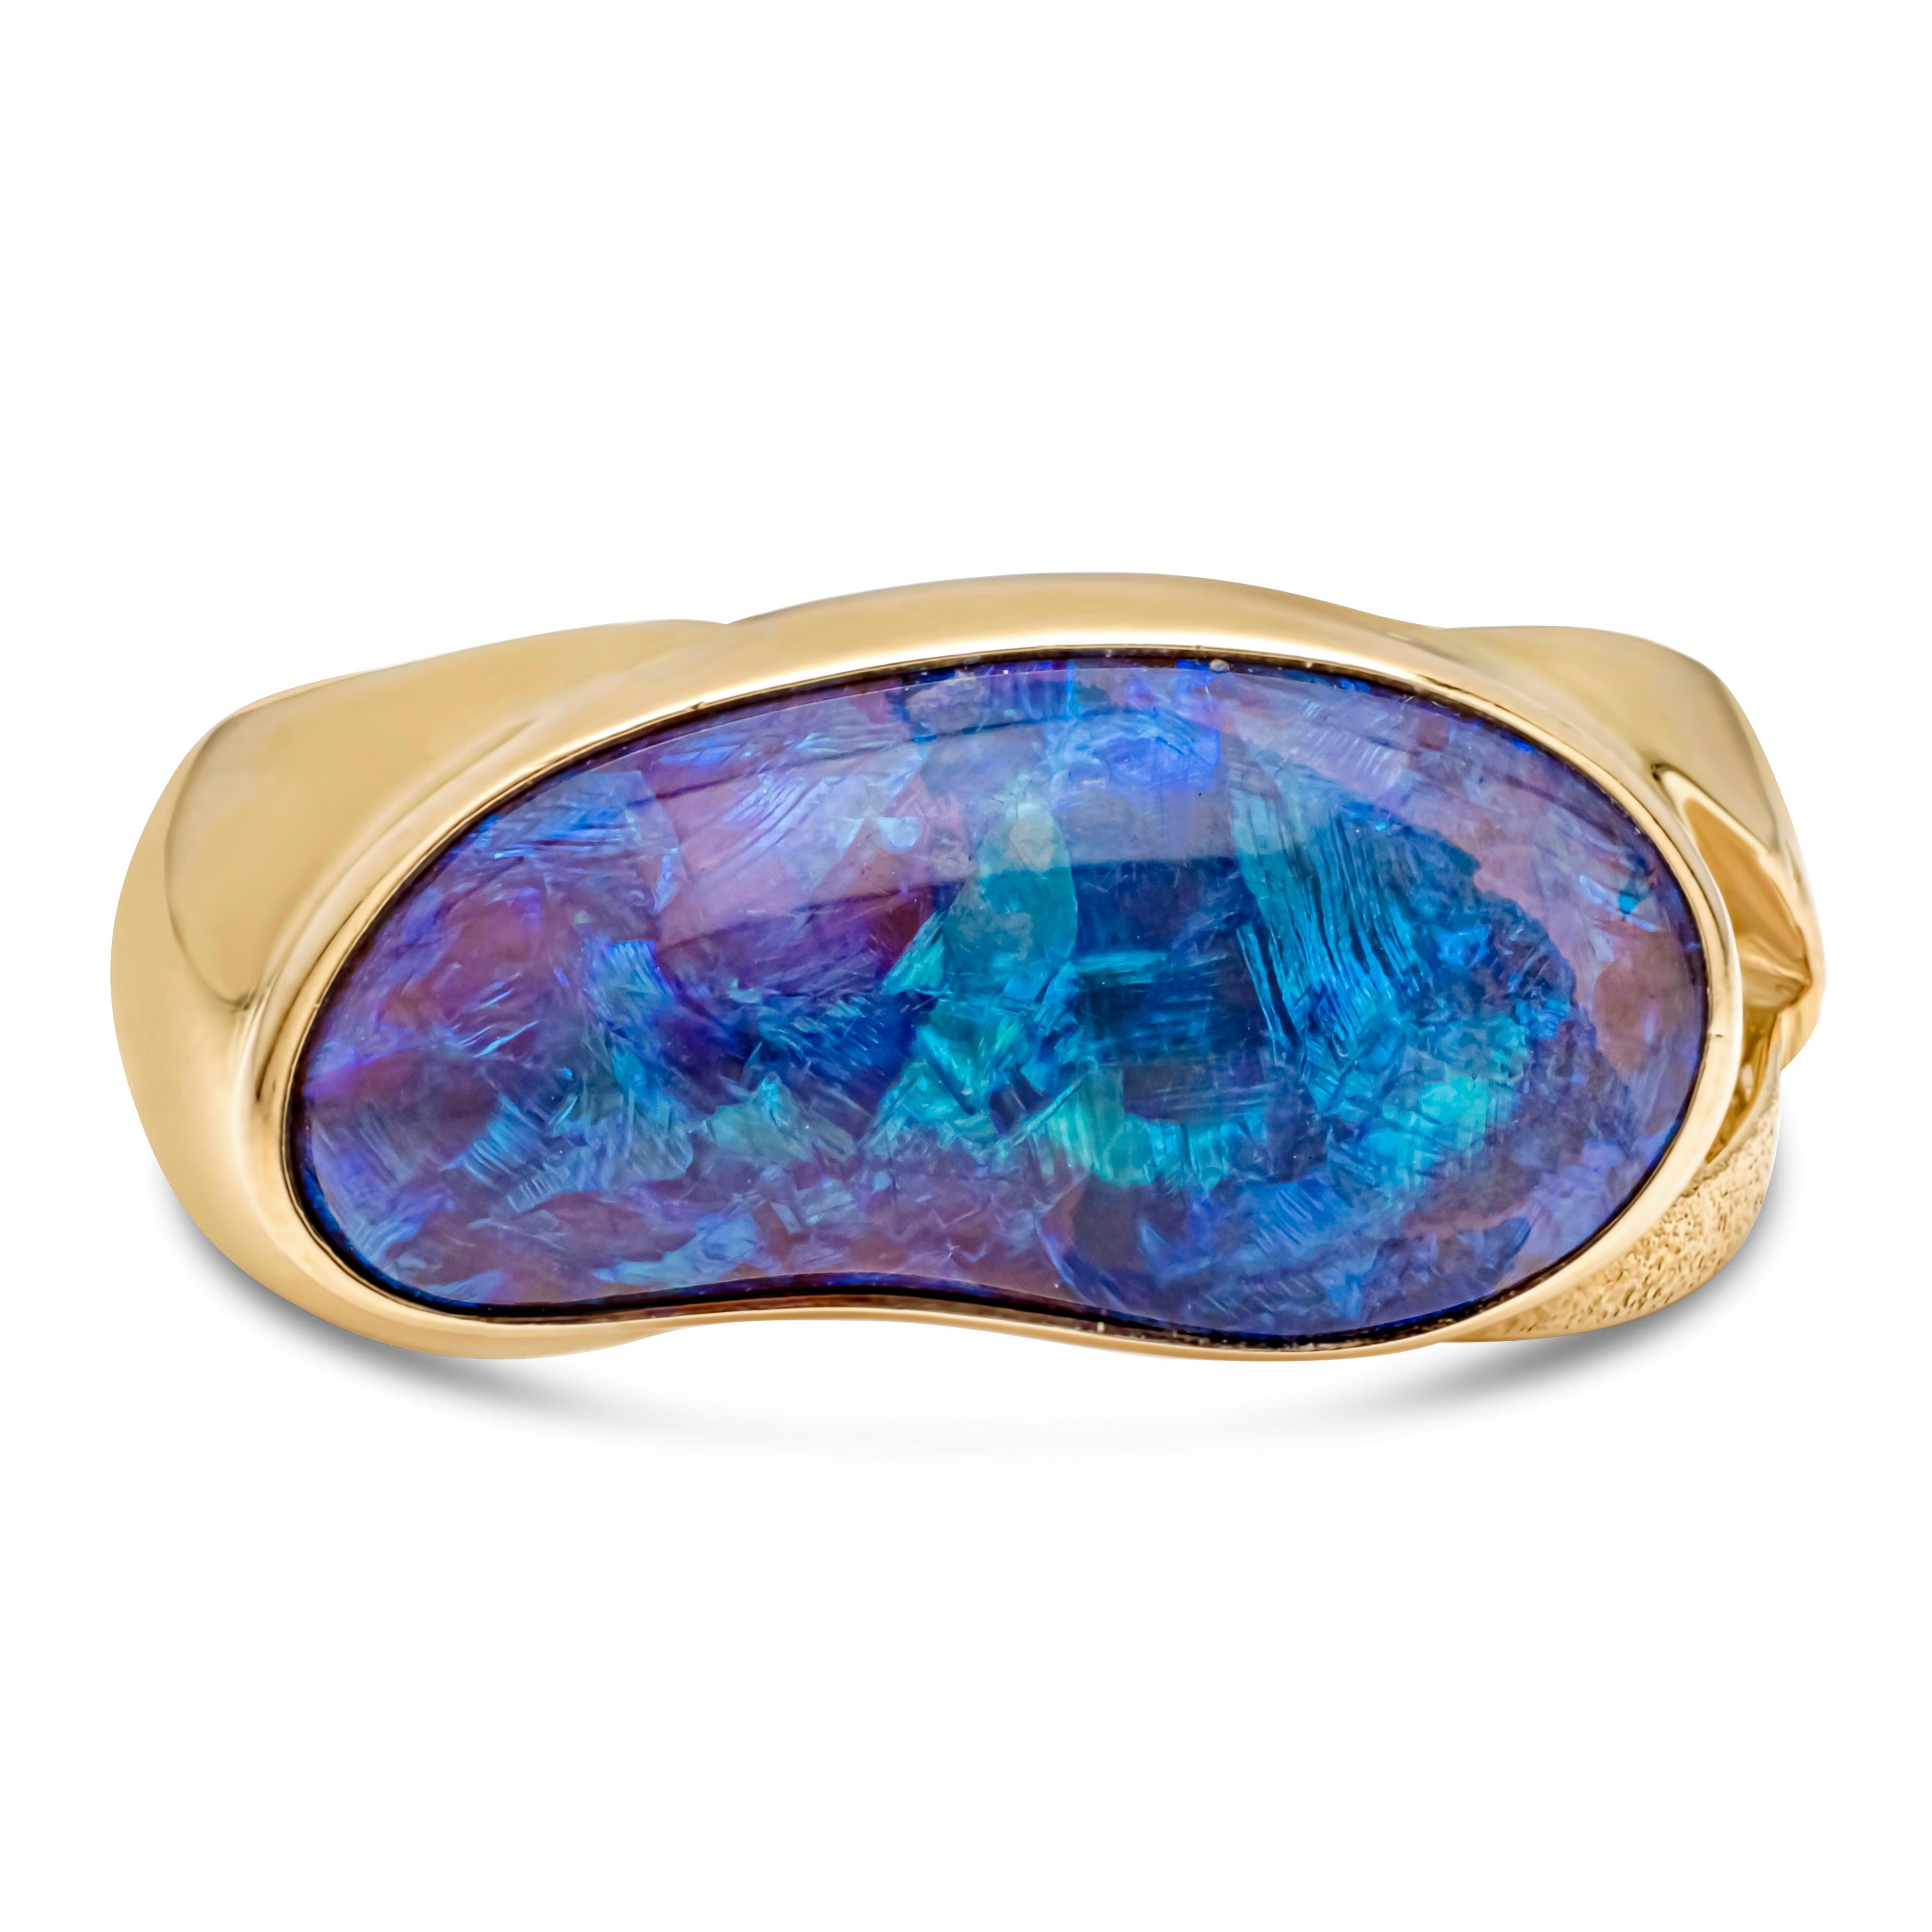 Showcasing a stunning and beautiful GIA certified 9.00 carats natural black opal freeform gemstone perfectly set in 18k yellow gold. Size 8.75 US resizable upon request, 11.60 mm in length and 23.16 mm in width.

Style available in different price